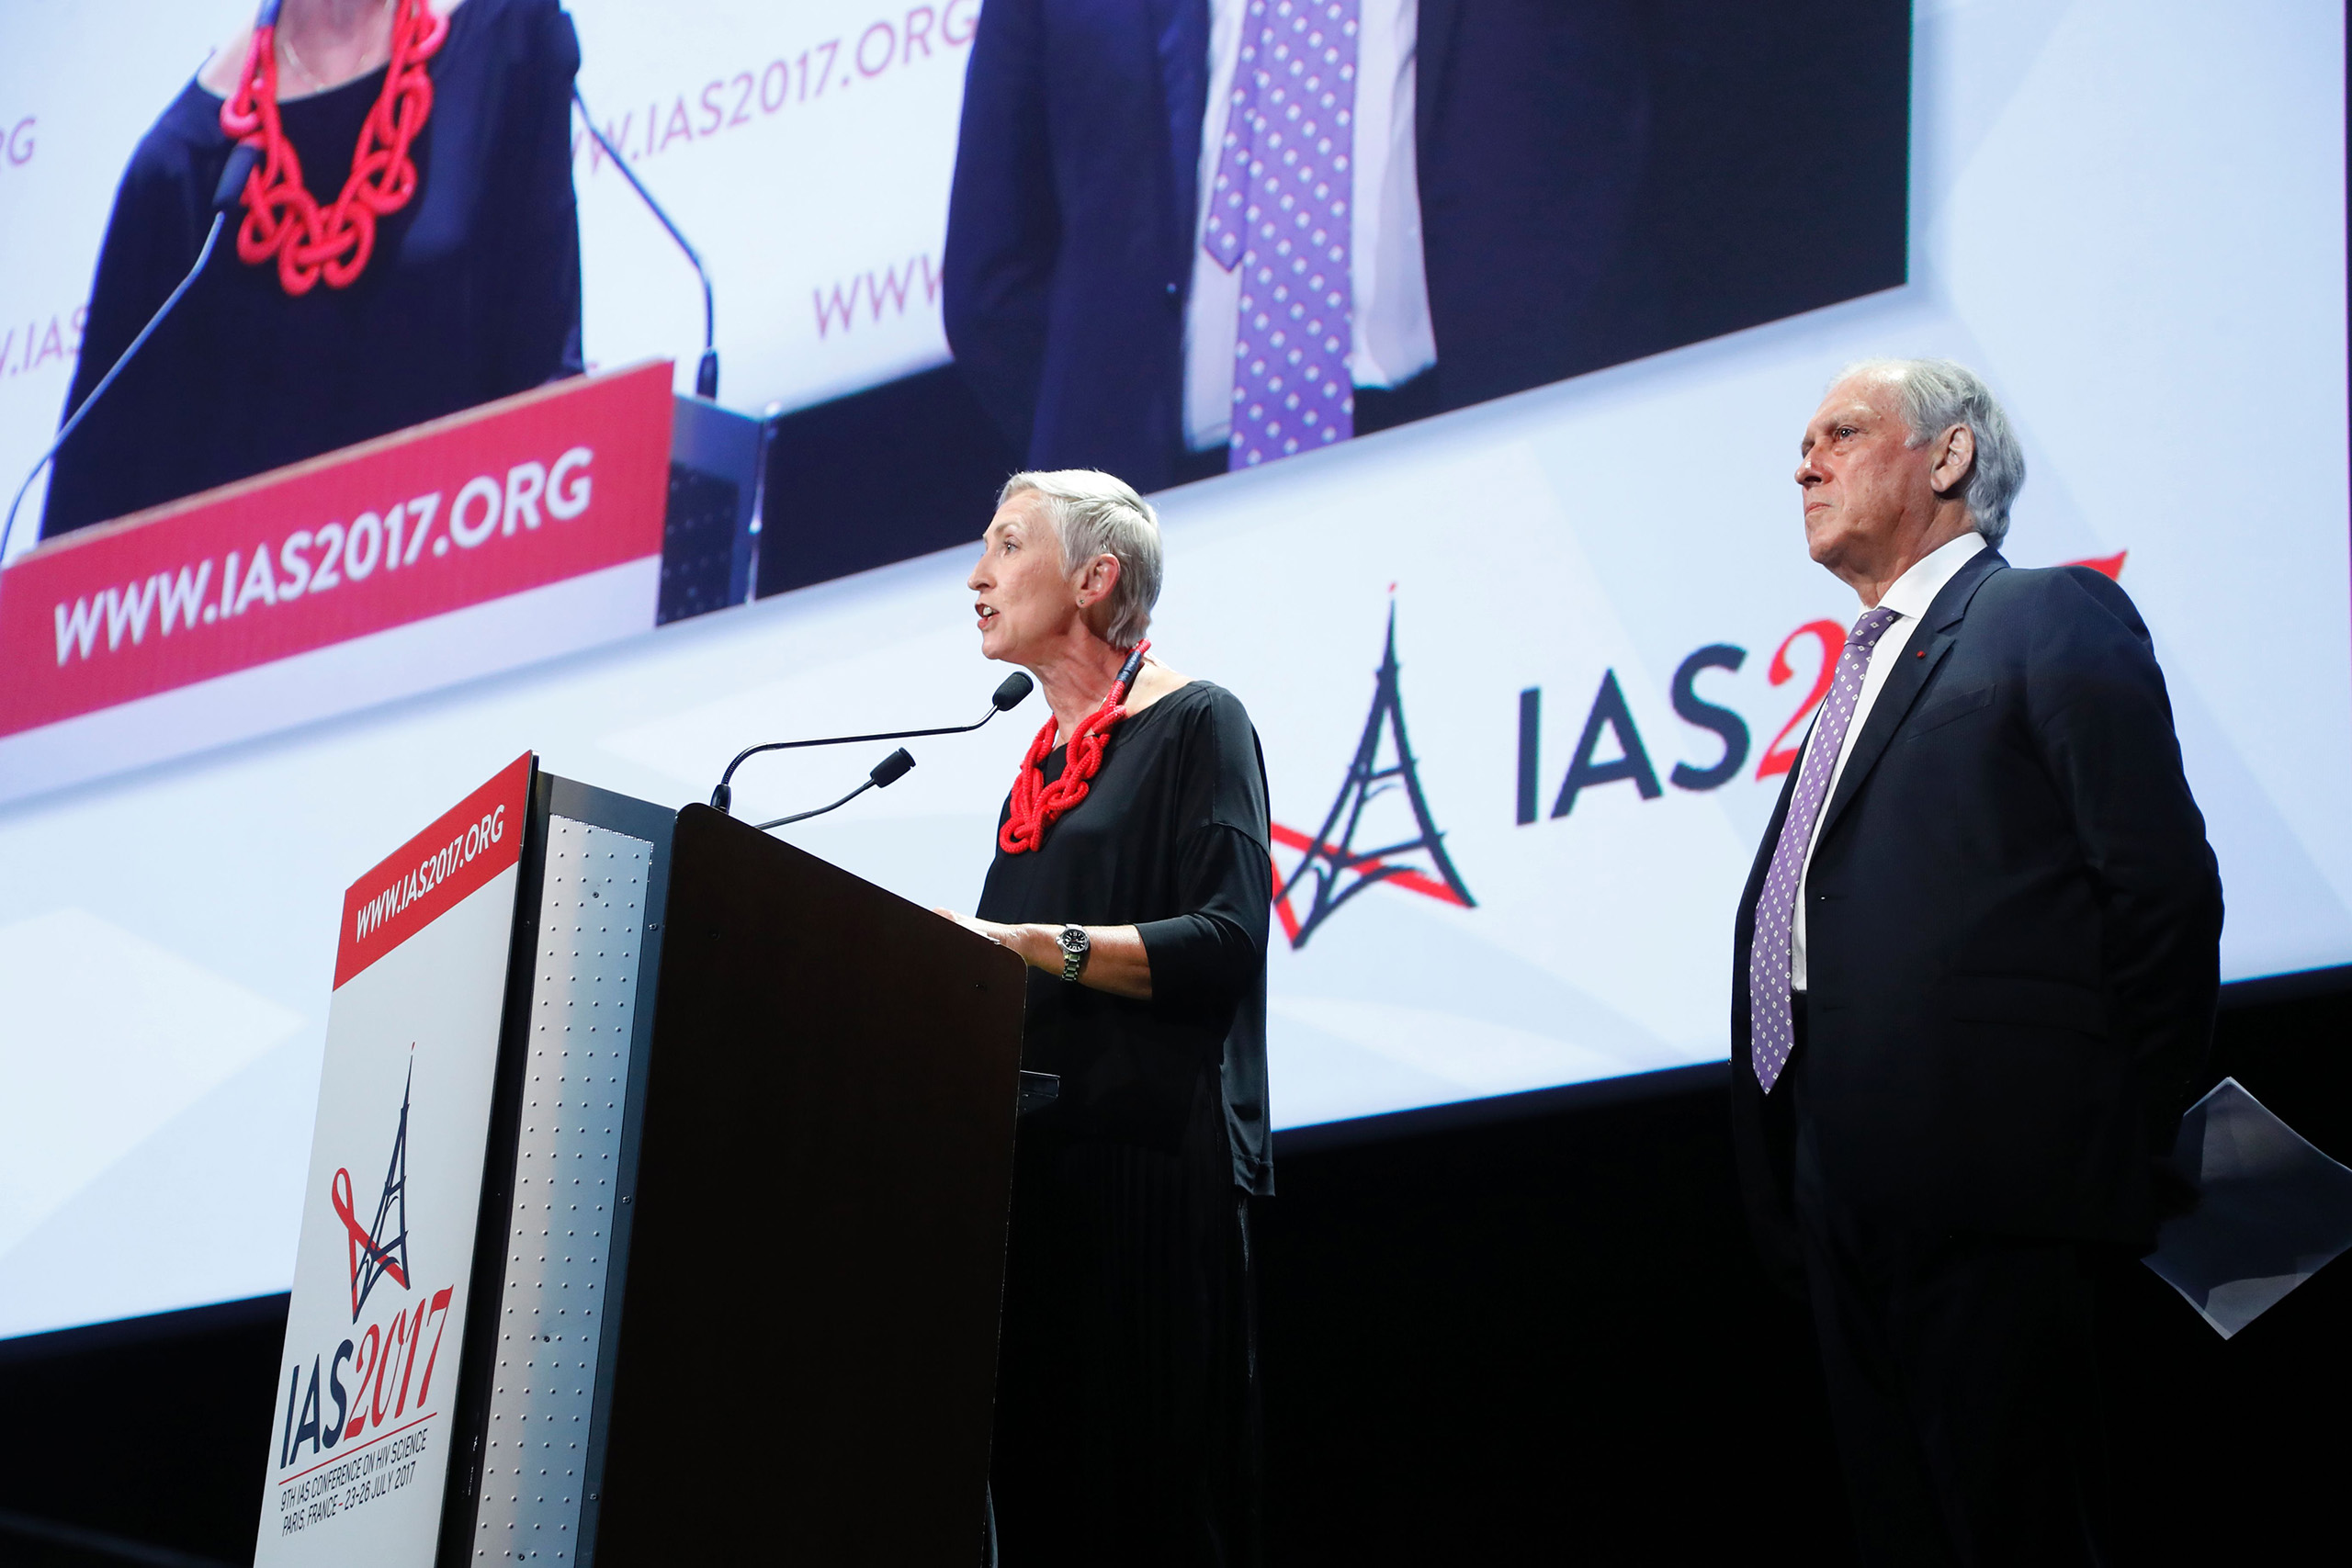 International AIDS Society president Linda-Gail Bekker and President of the French National Ethics Advisory Committee  and conference chairman Jean-Francois Delfraissy  attend the opening of the 9th International AIDS Society conference on HIV Science on July 23, 2017, in Paris. (Francois Guillot—AFP/Getty Images)